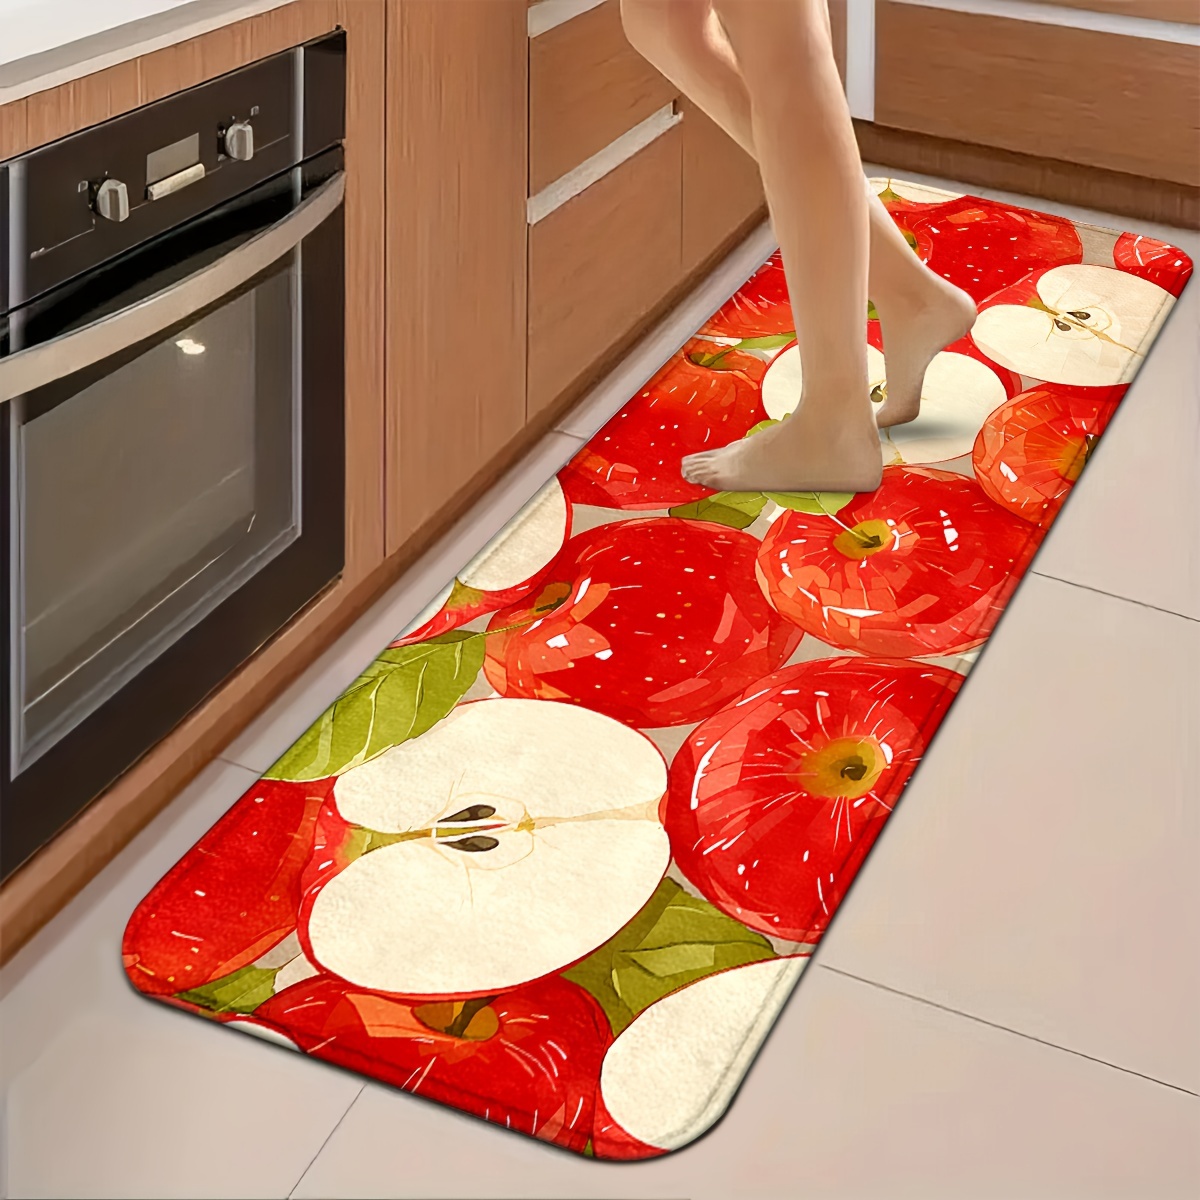 

Kitchen Mats: Non-slip, Durable, And Comfortable - Perfect For Kitchen, Home, Office, Bathroom, And Laundry Room - 1.2cm Thickness - Machine Washable - Available In Various Sizes